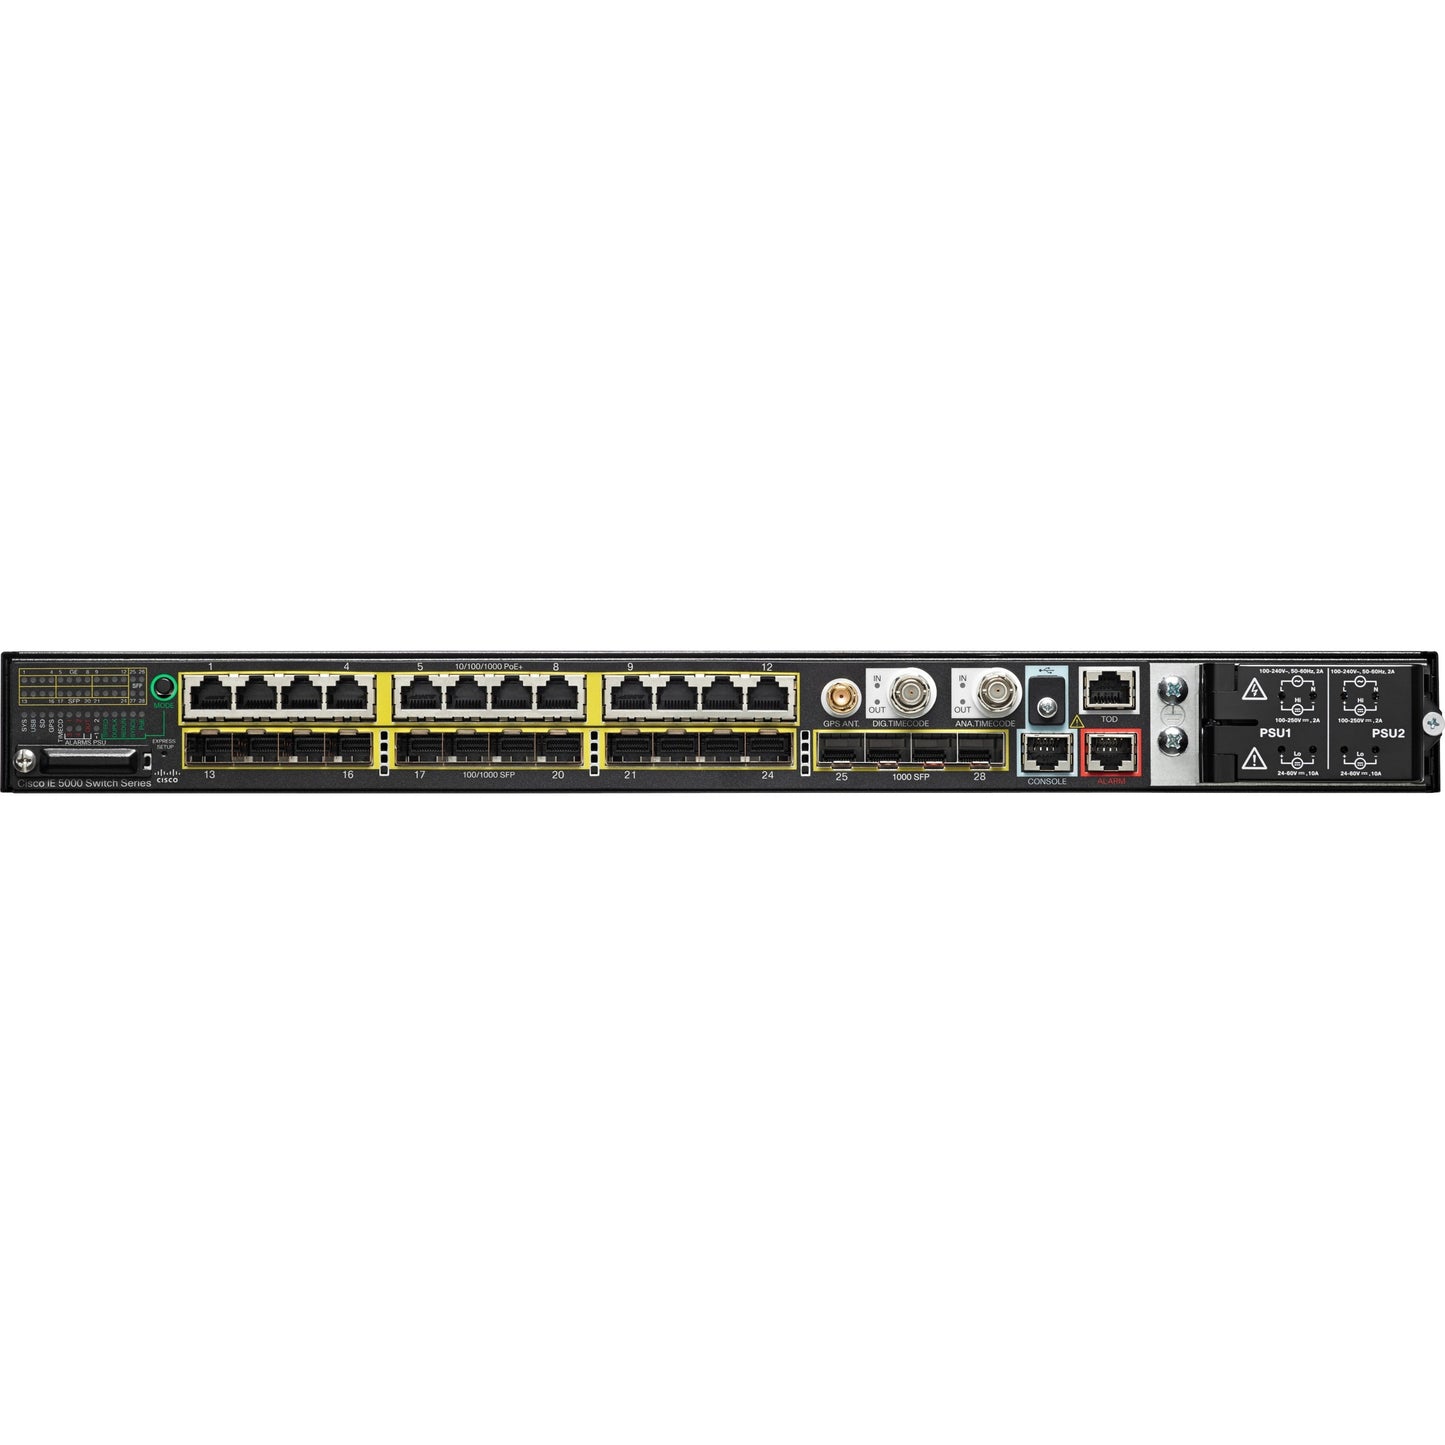 Cisco Industrial Ethernet IE-5000-16S12P Ethernet Switch